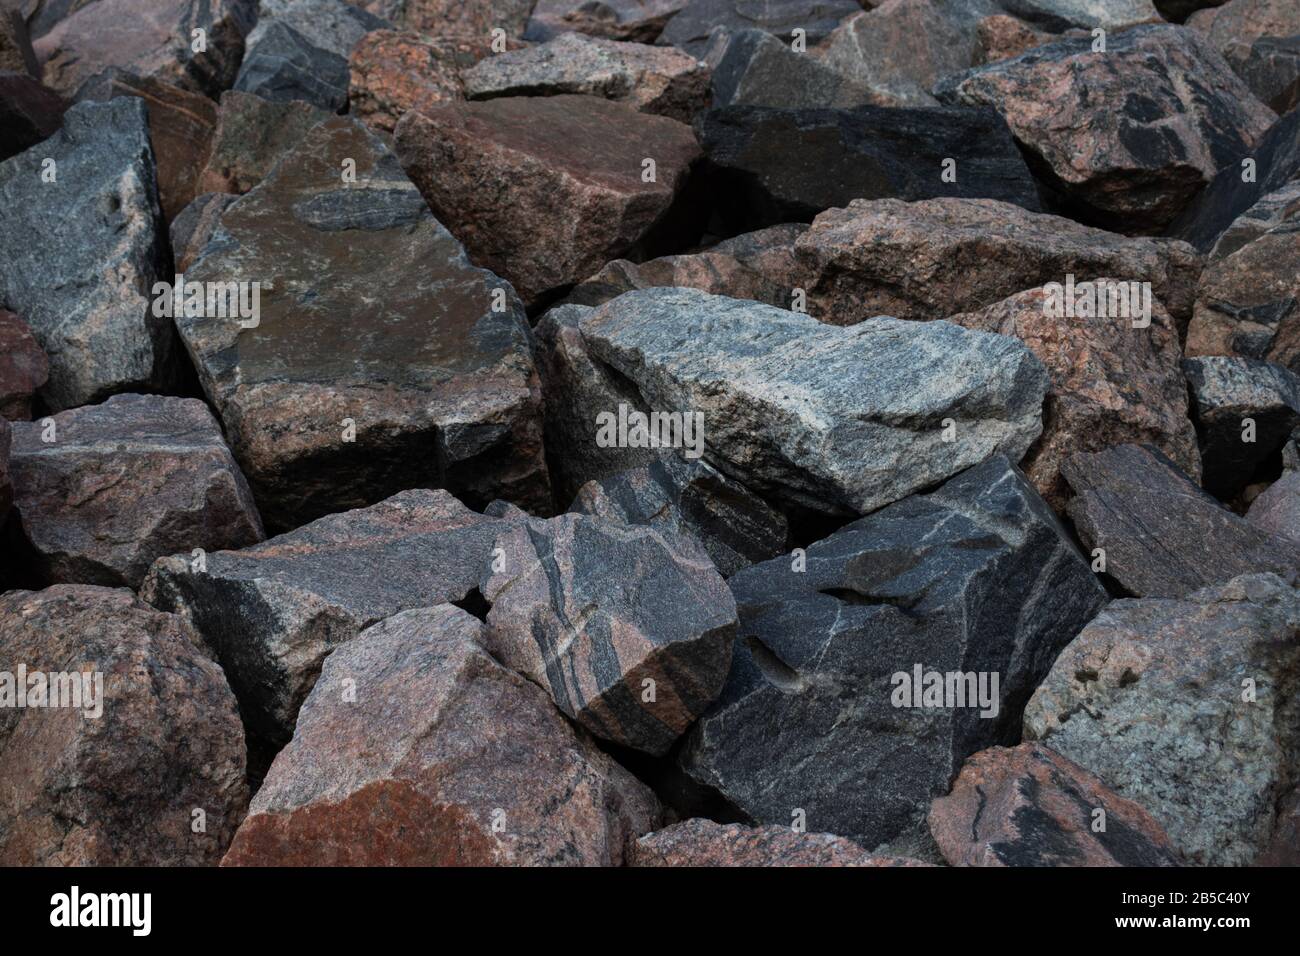 A pile of large pieces of stone or rock. Natural background. Copy space Stock Photo